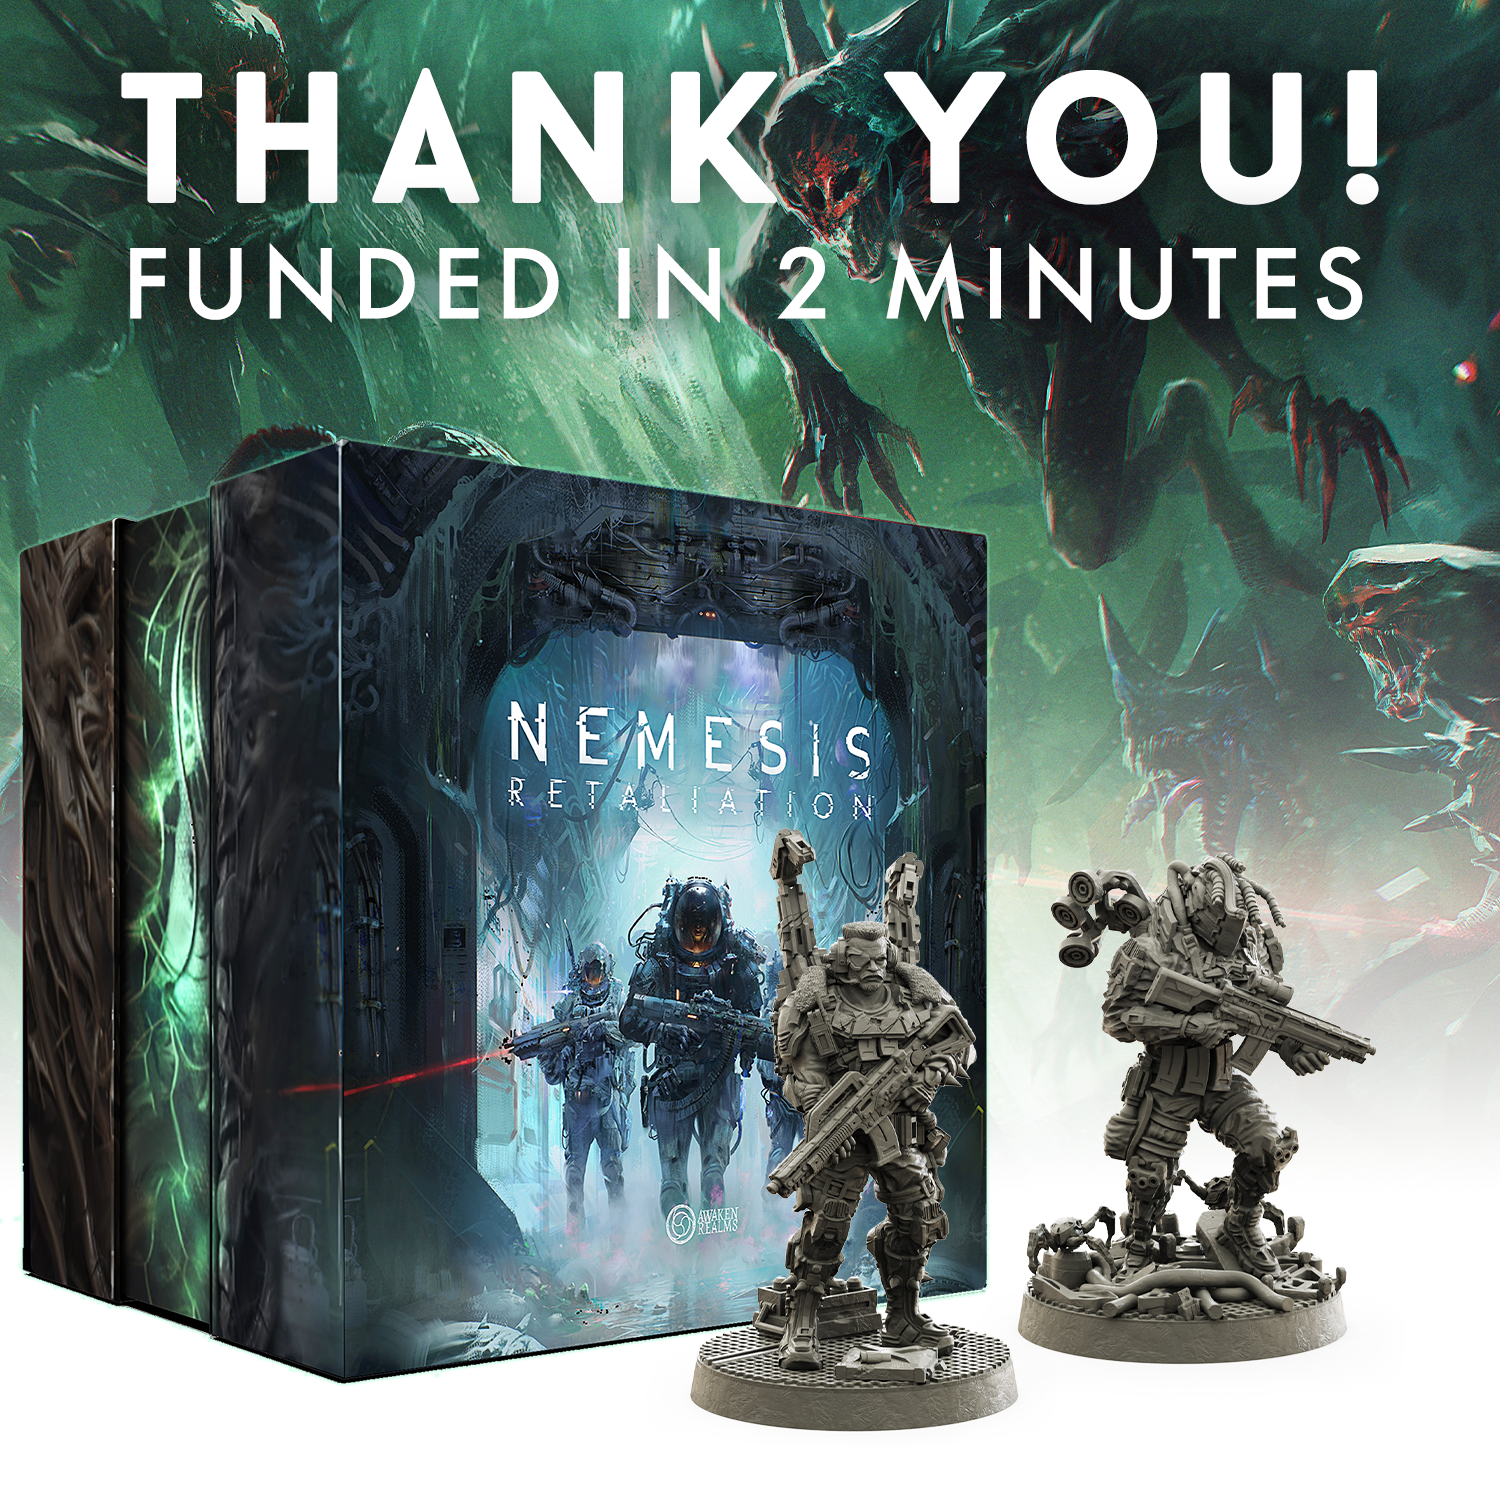 Nemesis Retaliation upcoming campaign just had a huge update